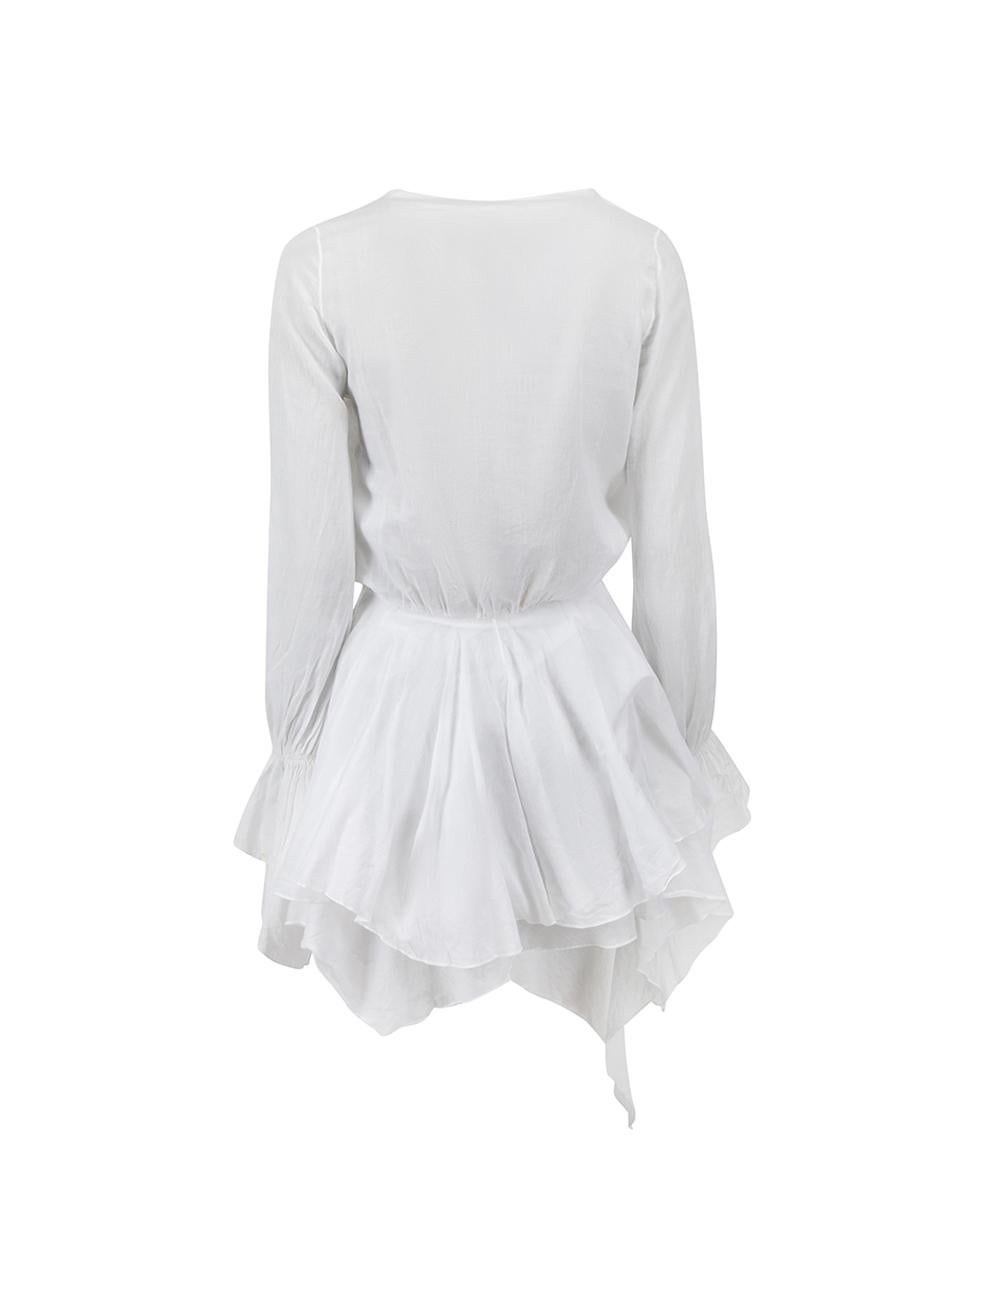 Alexandre Vauthier White Tiered Skirt Mini Dress Size XS In Good Condition For Sale In London, GB